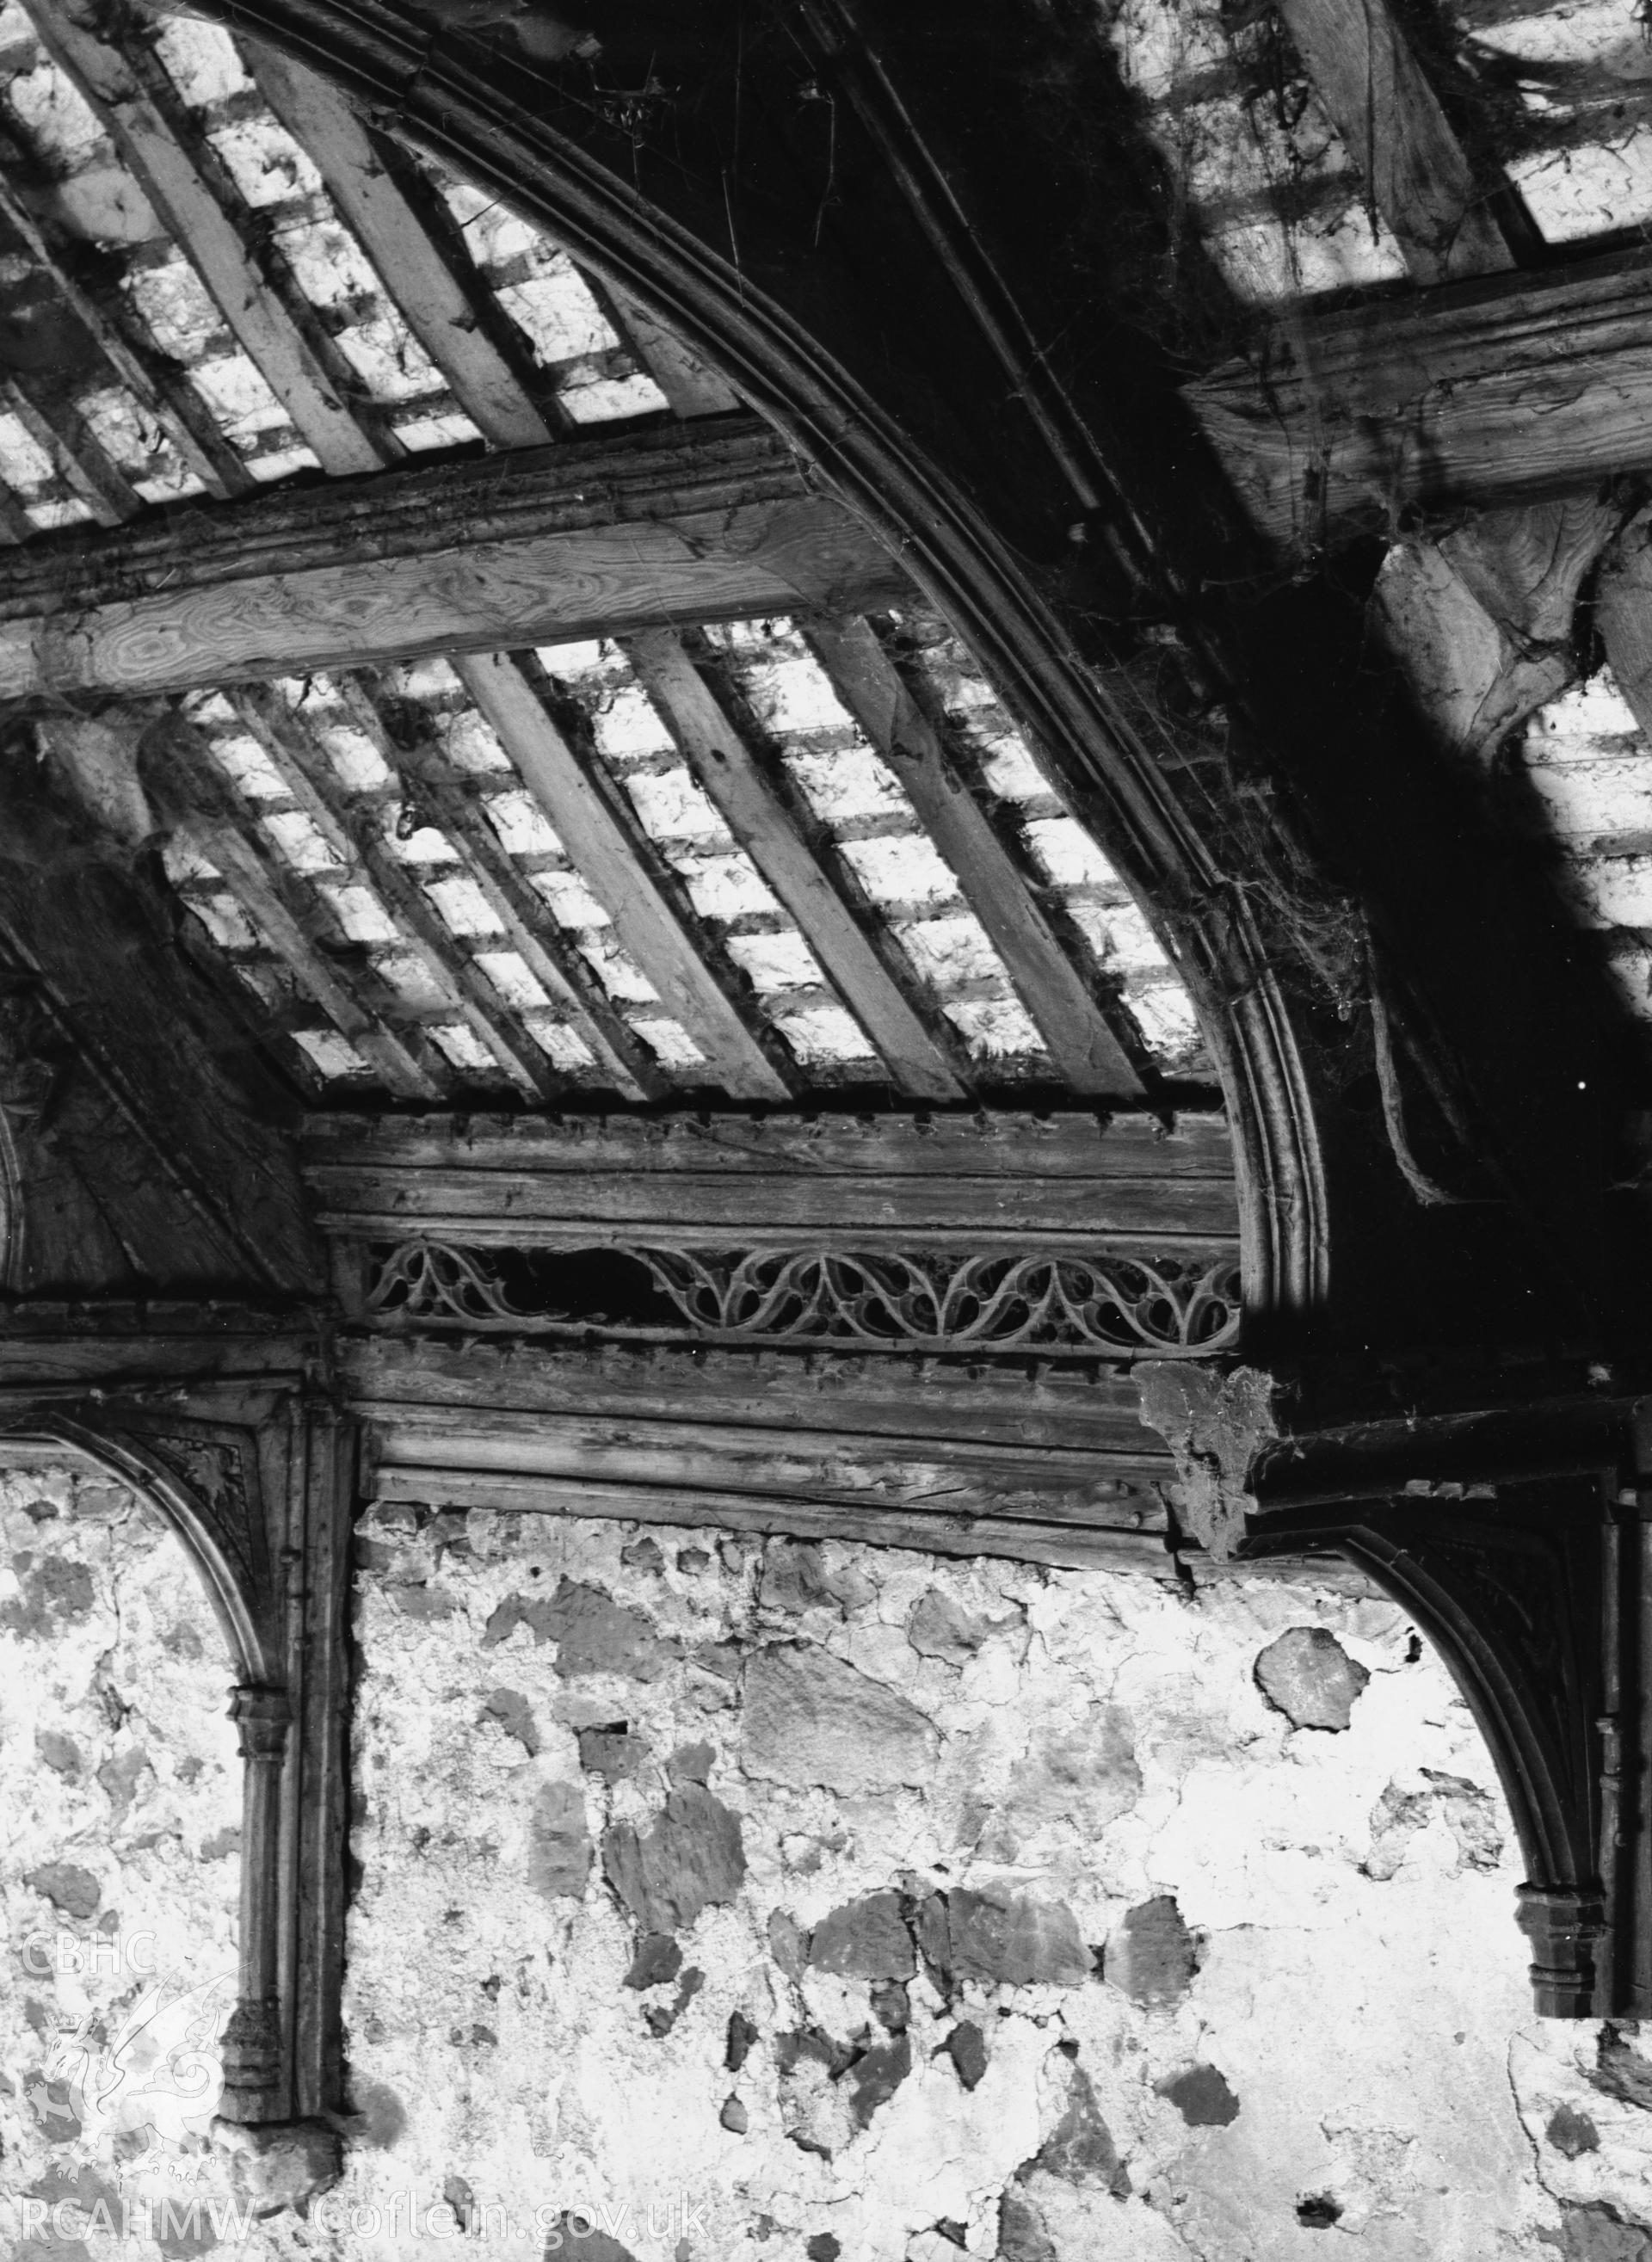 Interior view showing detail of the roof and pierced cornice.